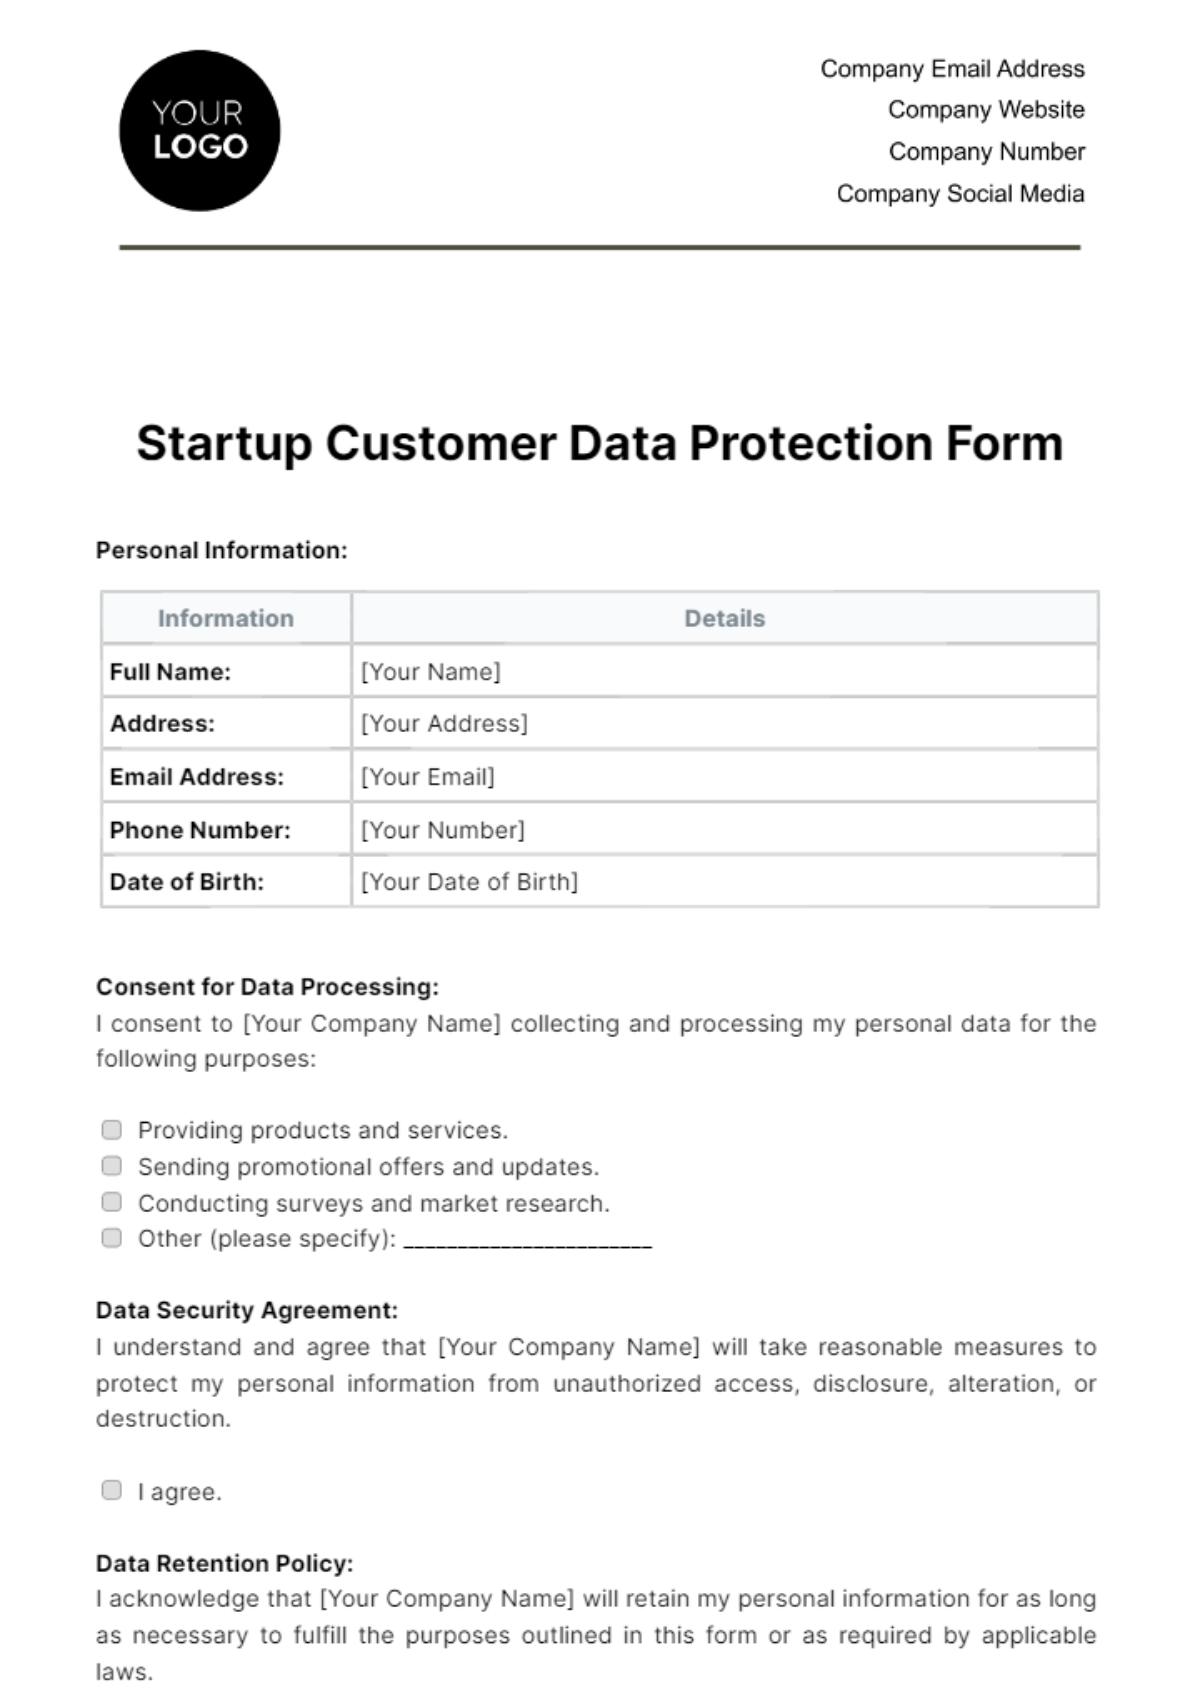 Free Startup Customer Data Protection Form Template